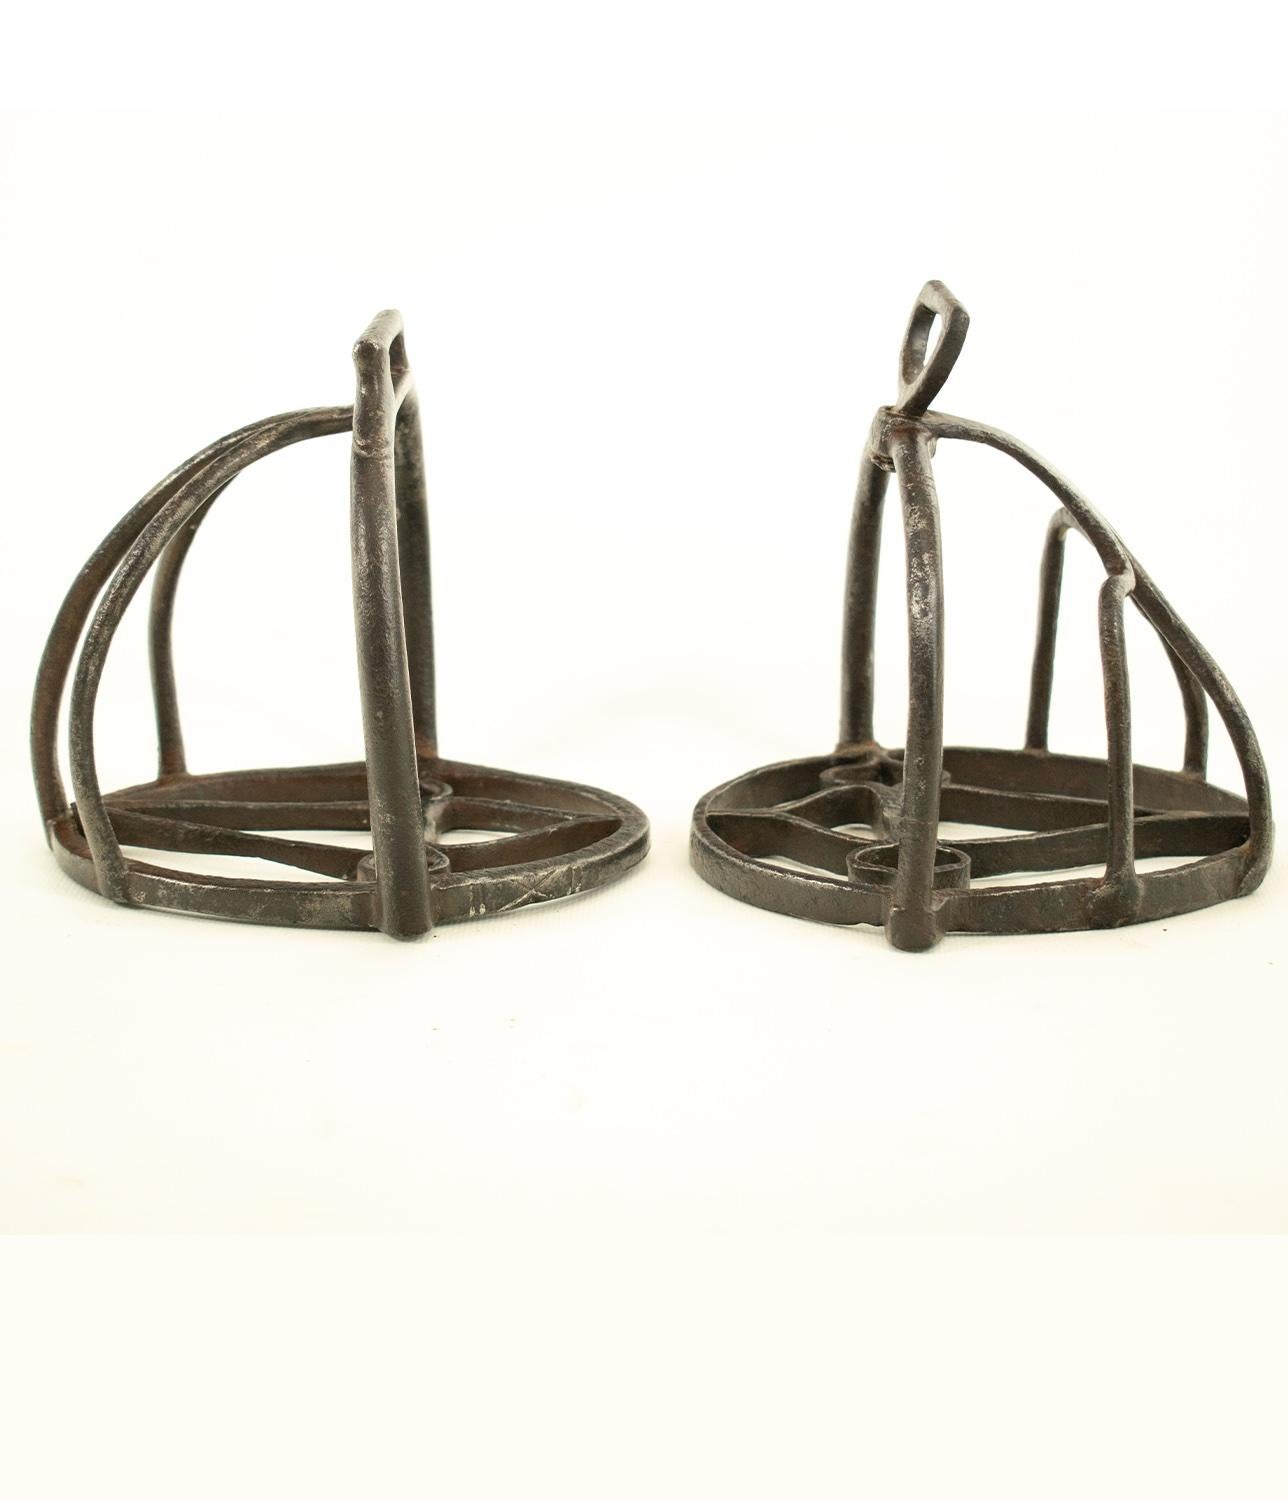 European Composed pair of original mid 17th/early 18th century Cavalry basket Stirrups For Sale